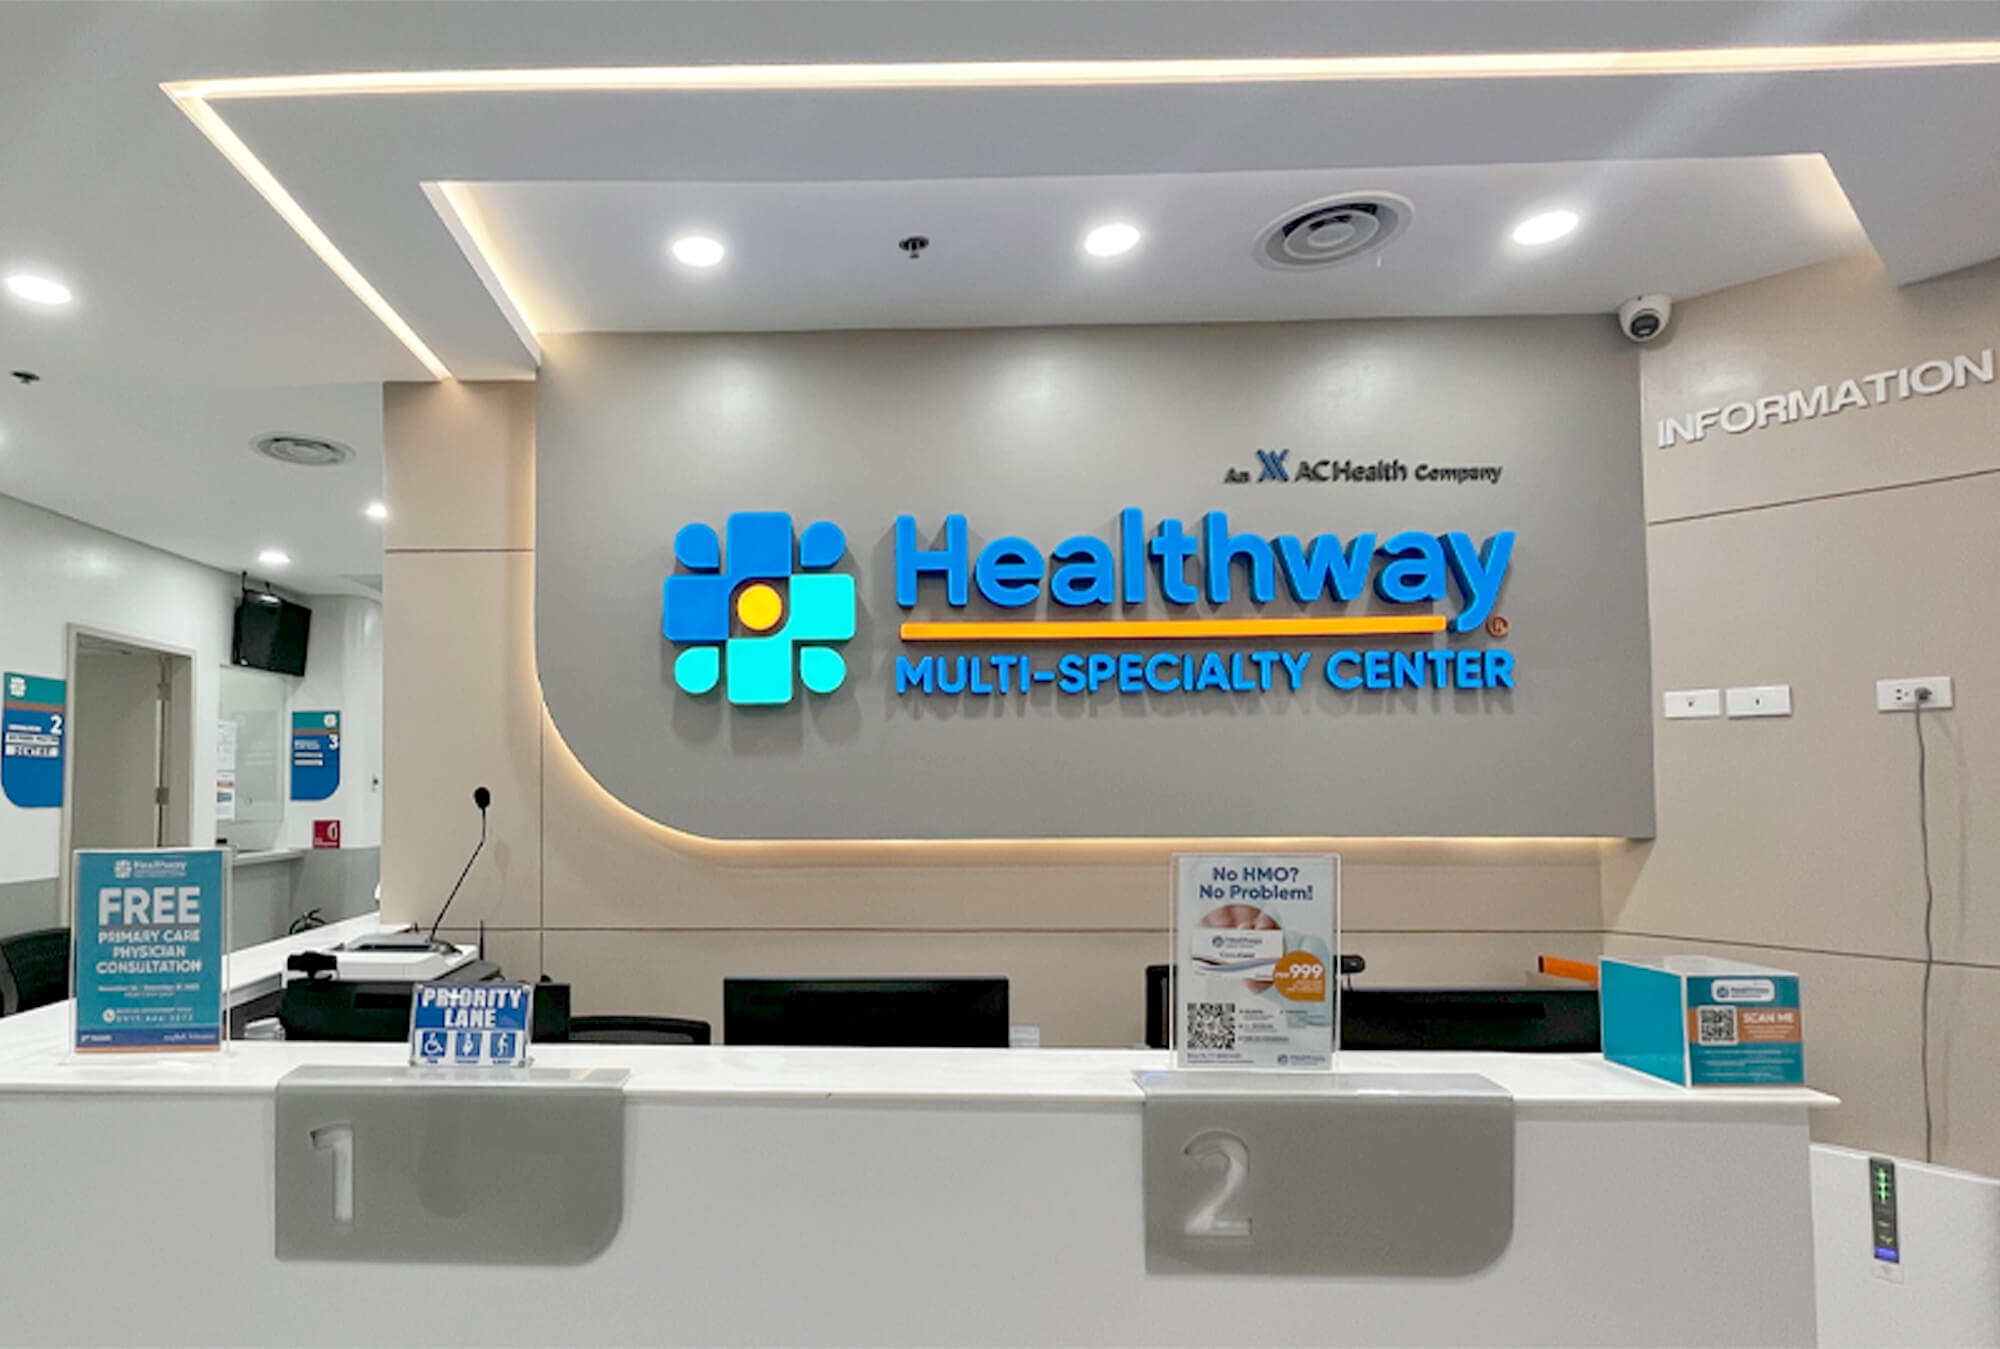 Healthway Medical Network|Corporate Health Solutions